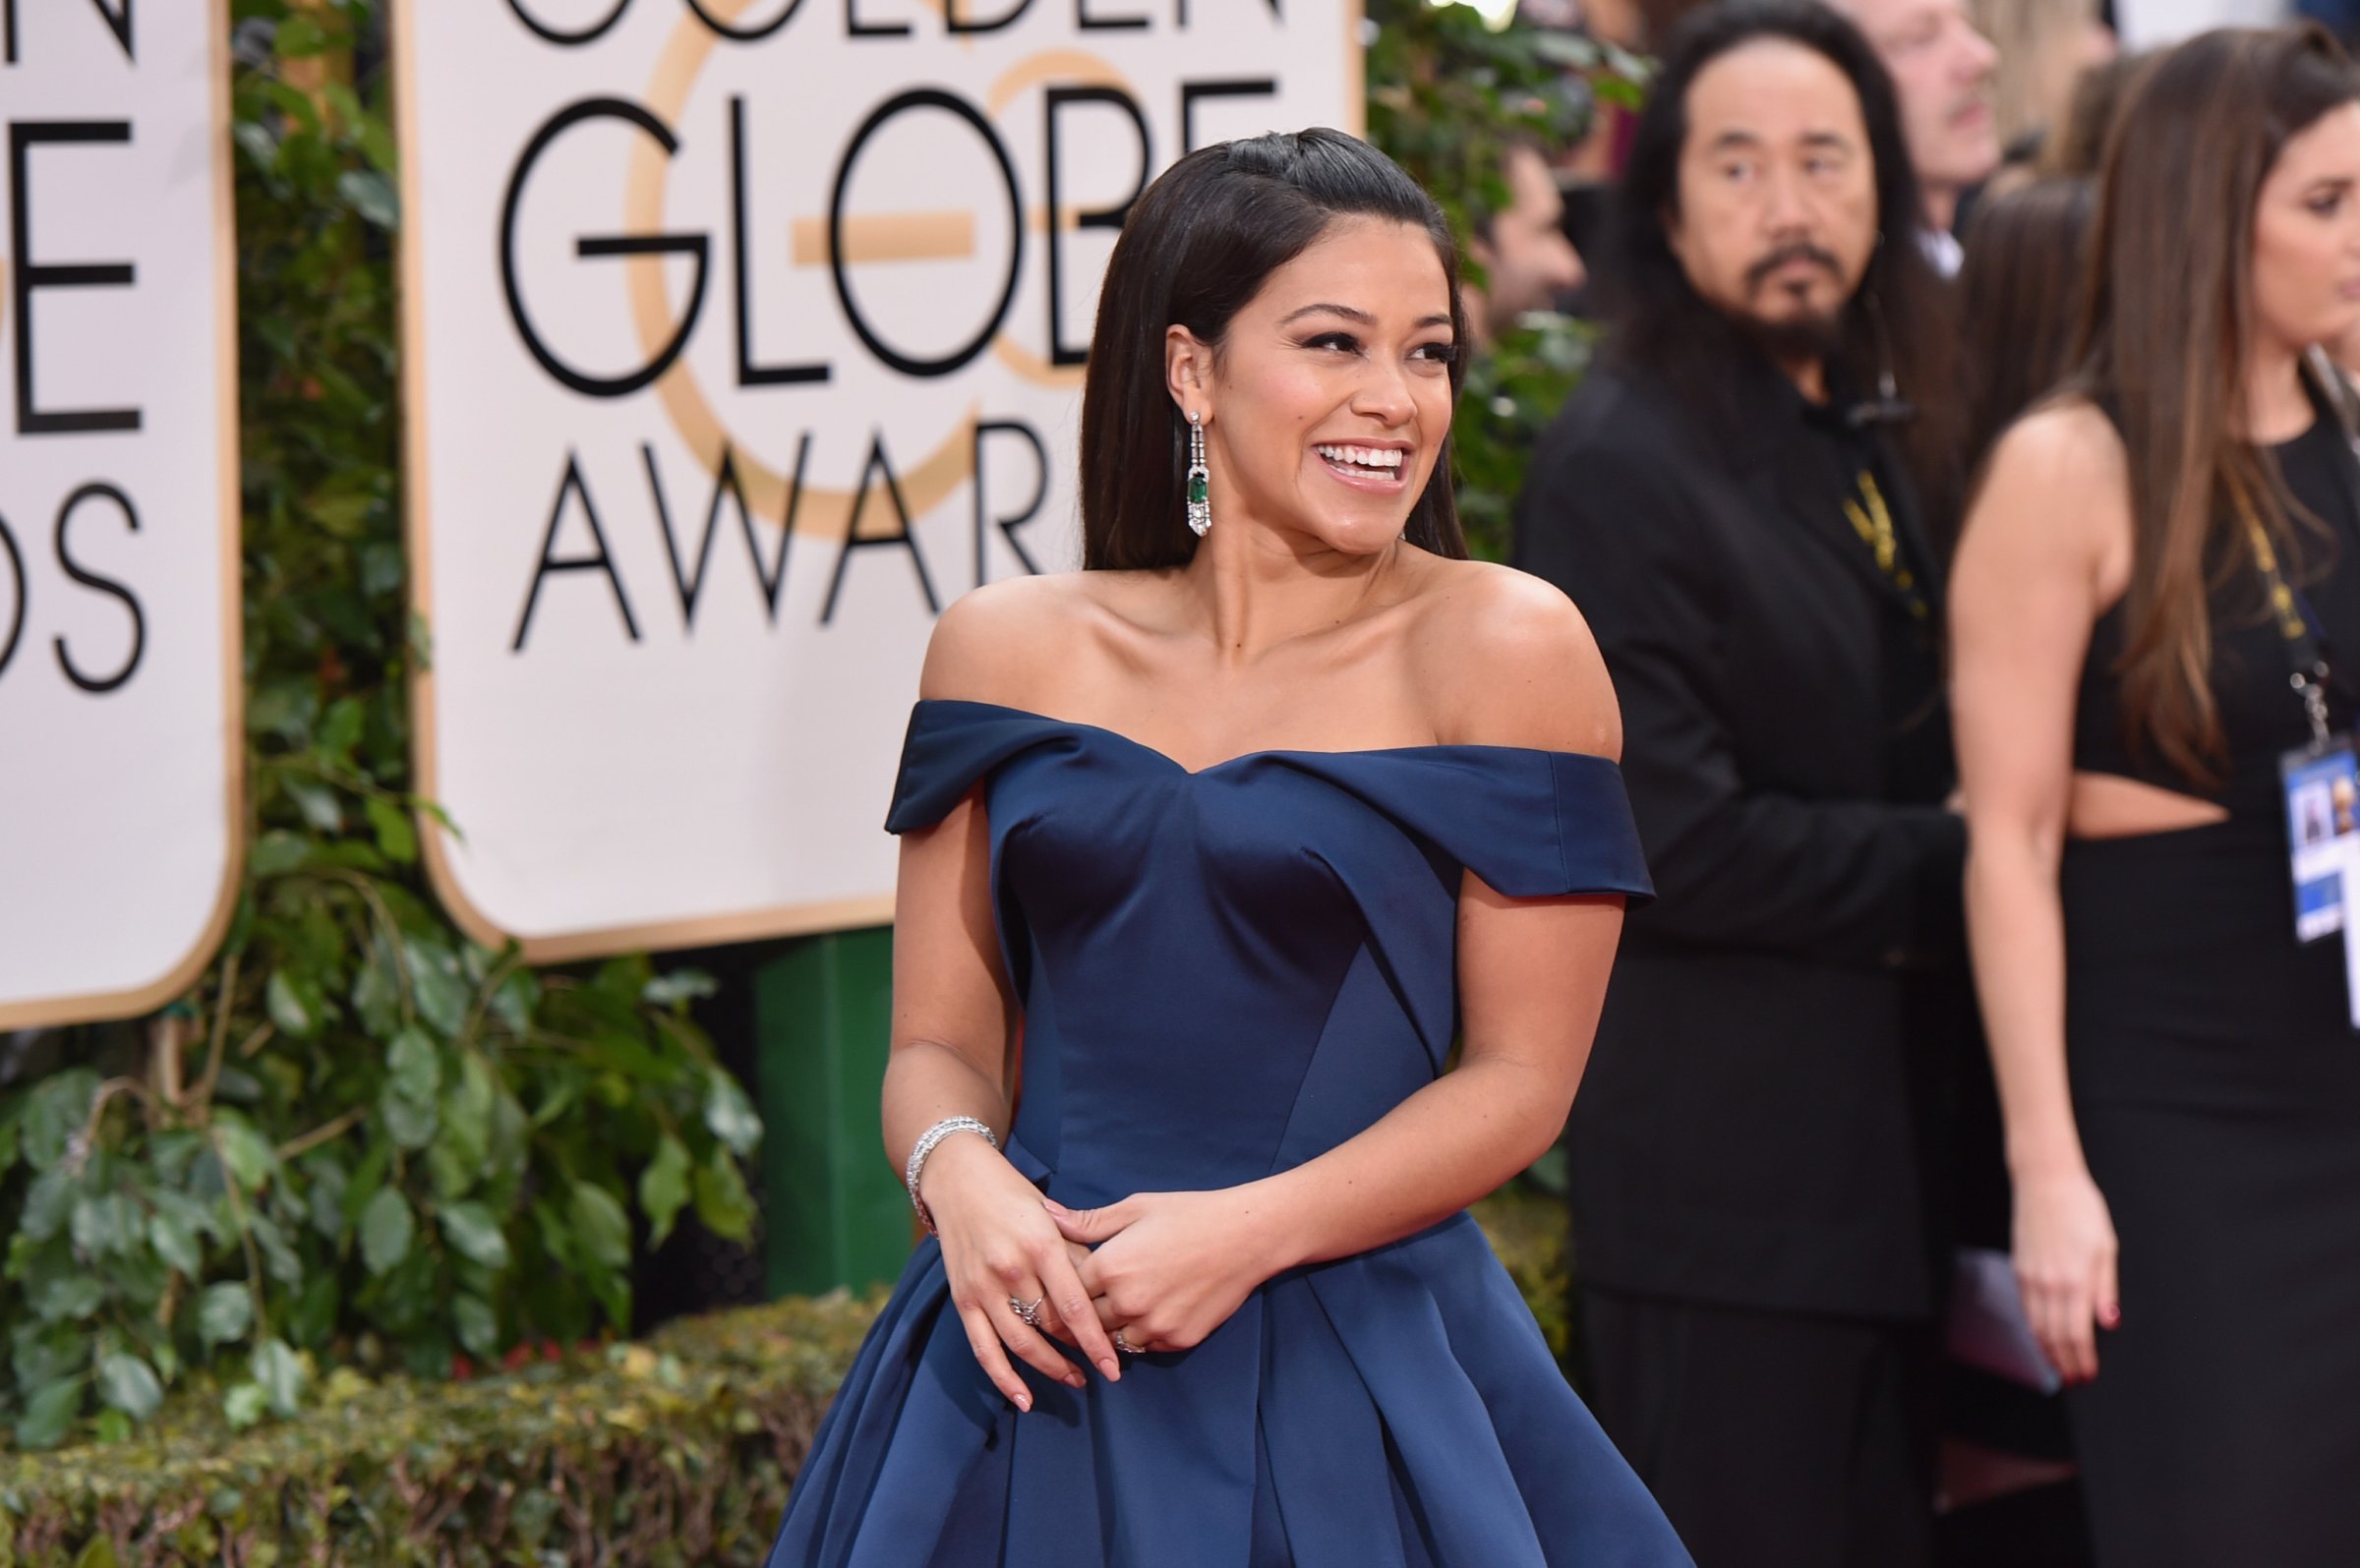 Actress Gina Rodriguez attends the 73rd Annual Golden Globe Awards held at the Beverly Hilton Hotel on January 10, 2016 in Beverly Hills, California.